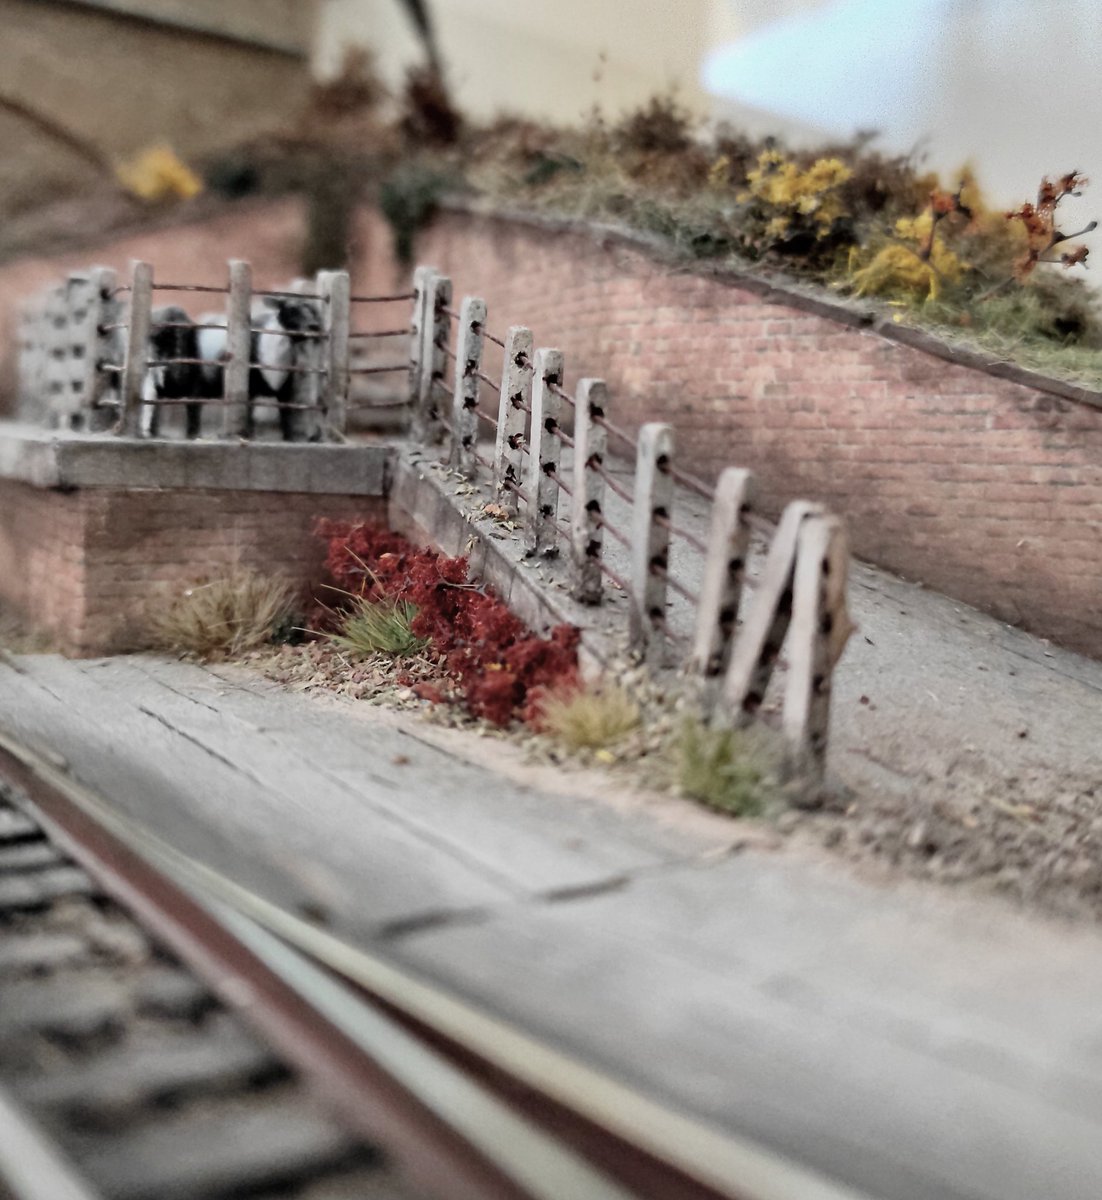 Layout Tour, Day 6: Stepping back you can see the ramp for the cattle dock. A few of the weeds have turned browny-red as the days of autumn get shorter.
.
#00gauge #oogauge #4mmscale #176scale #modelrailway #modelrailroad #modeltrains #TMRGUK #modelisme #modelbahn #hoscale